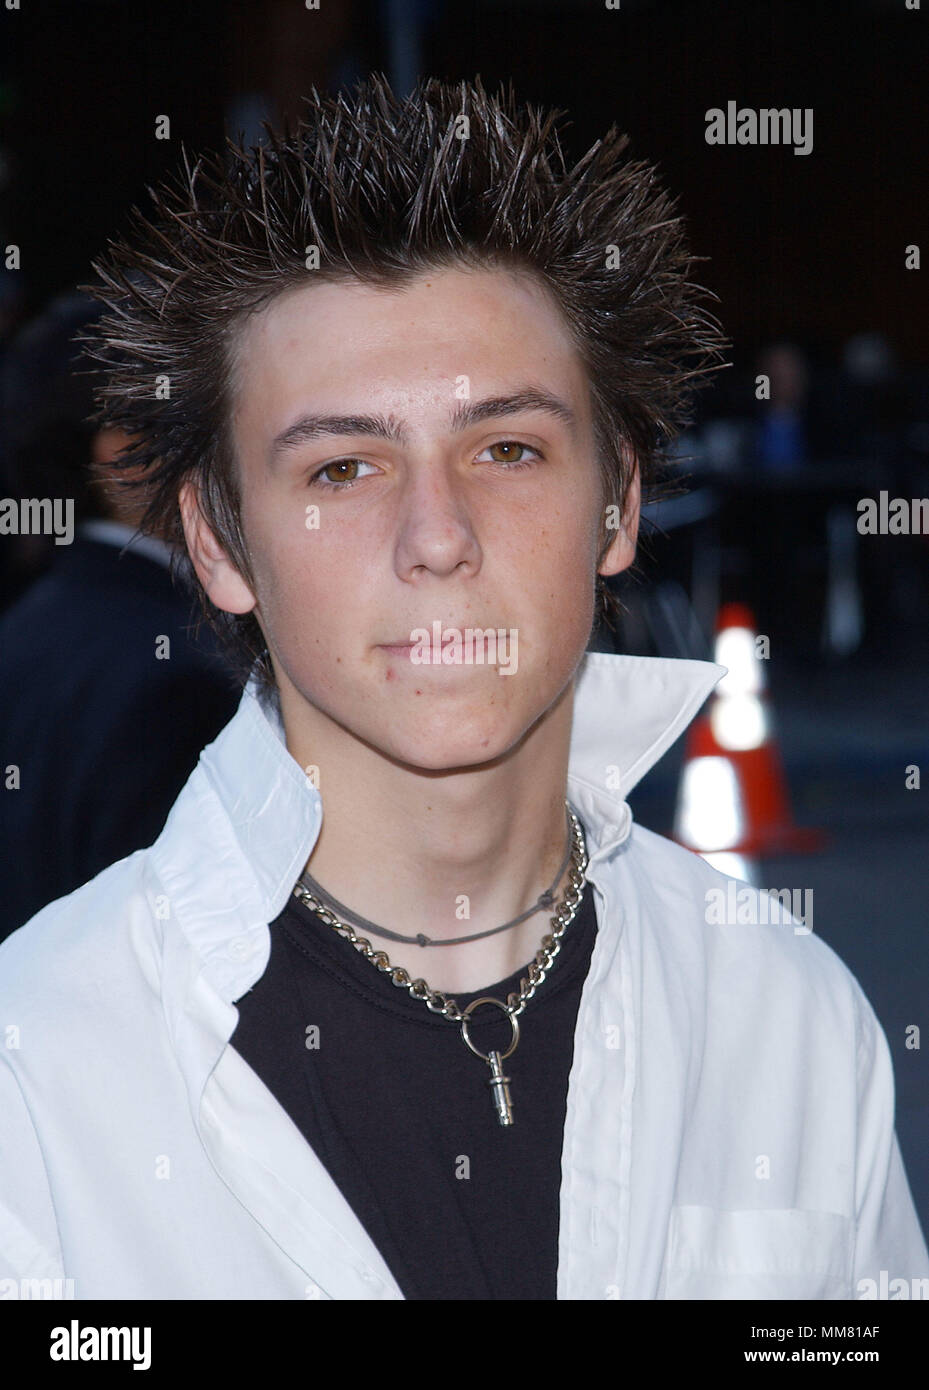 Jake Richardson arriving at the Jay and Silent Bob Strike Back premiere at the Bruin Theatre in Los Angeles. August 15, 2001  © TsuniRichardsonJake01.jpgRichardsonJake01 Red Carpet Event, Vertical, USA, Film Industry, Celebrities,  Photography, Bestof, Arts Culture and Entertainment, Topix Celebrities fashion /  Vertical, Best of, Event in Hollywood Life - California,  Red Carpet and backstage, USA, Film Industry, Celebrities,  movie celebrities, TV celebrities, Music celebrities, Photography, Bestof, Arts Culture and Entertainment,  Topix, headshot, vertical, one person,, from the year , 2001 Stock Photo